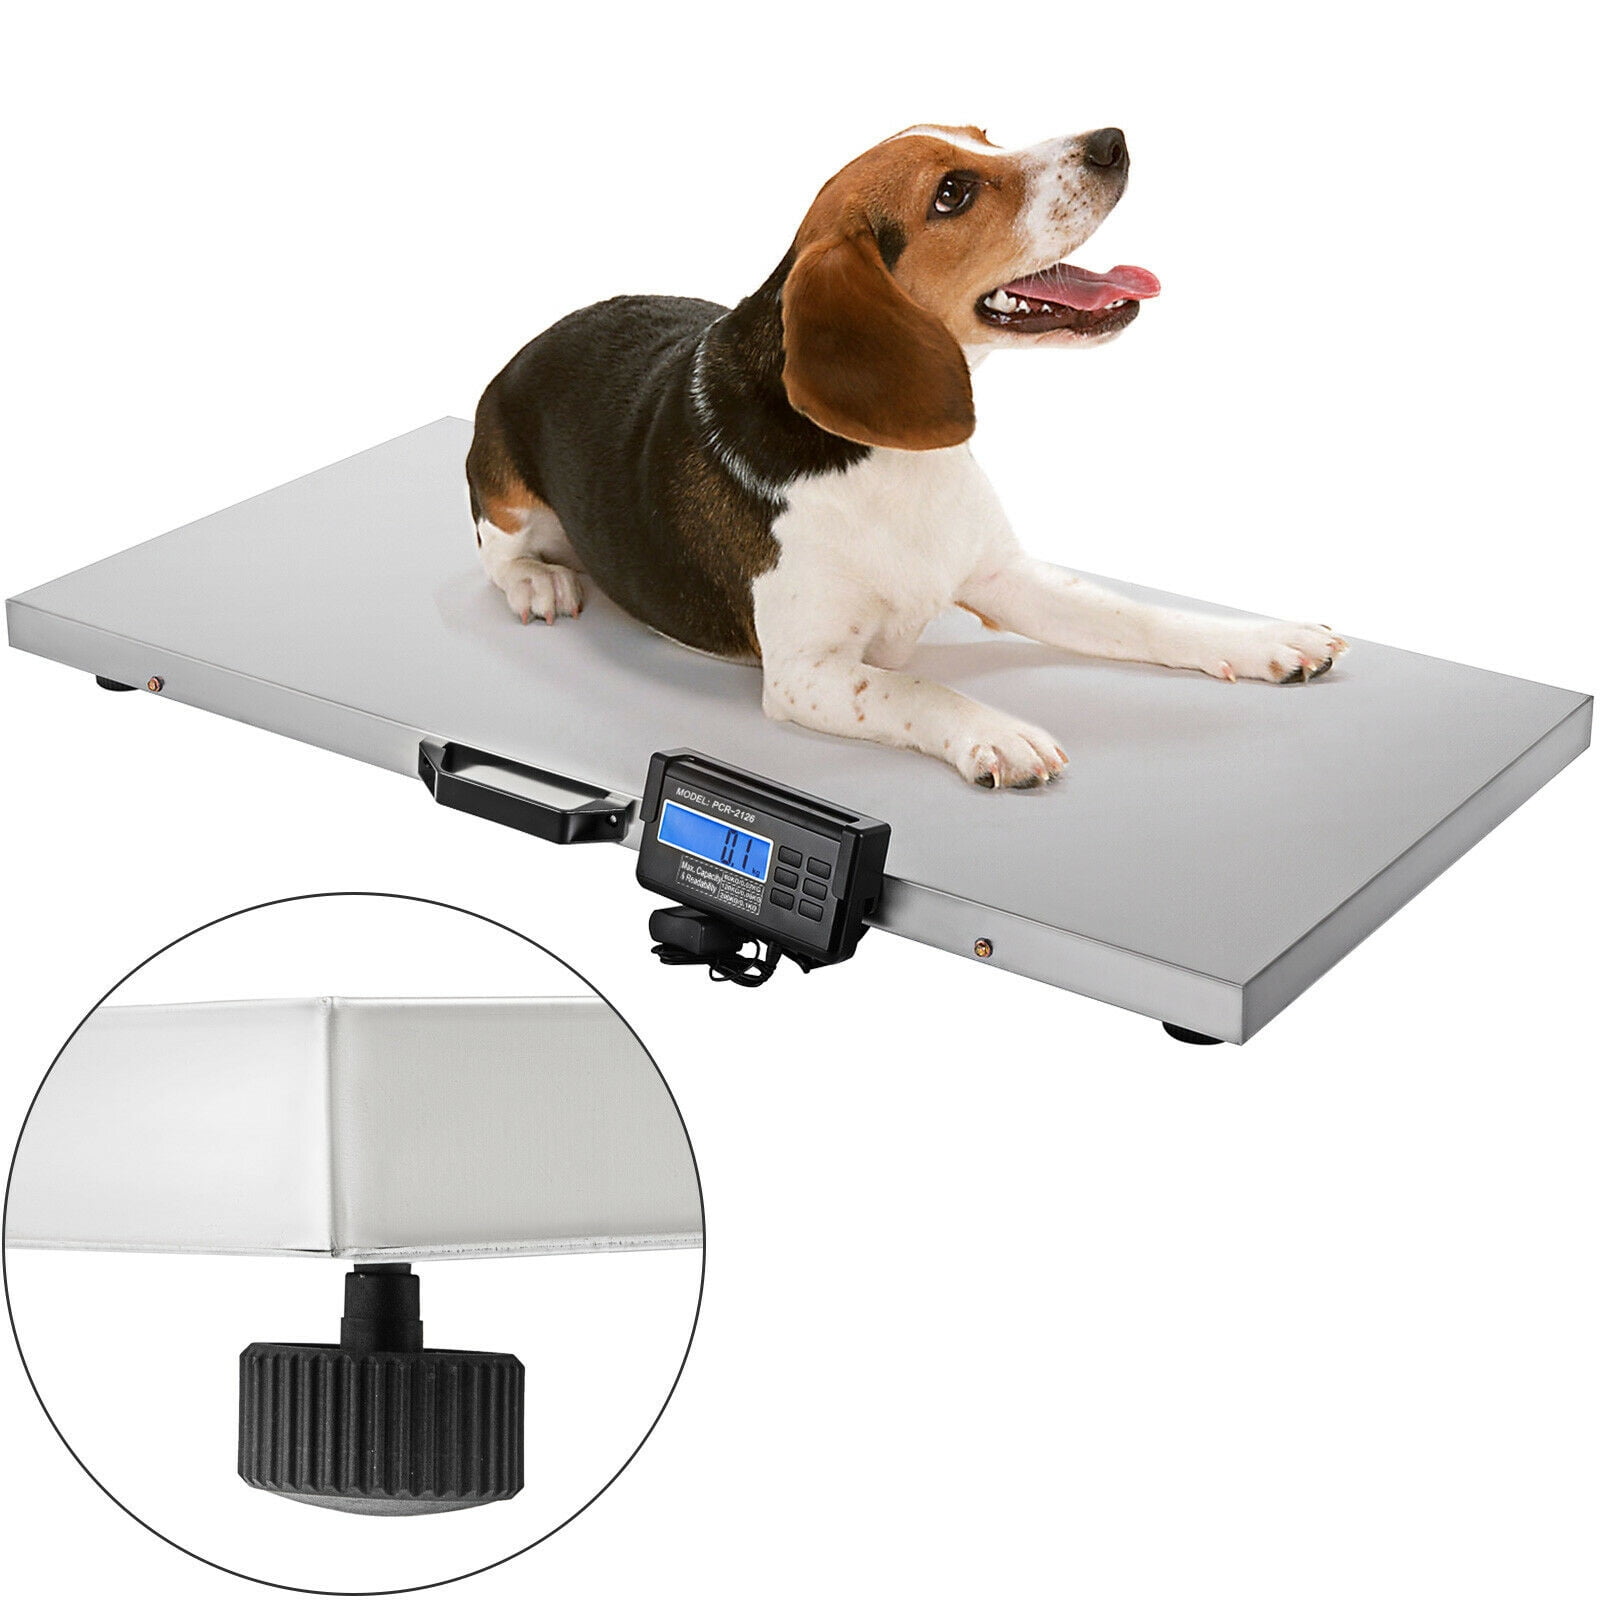  Flyvyan Digital Pet Scale, Puppy Scale for Whelping, Kitten  Scale with Foldable LED Display, Small Animal Scale for Dog/Cat/Rabbit/Hamster,  Kitchen Scale with Removable Tray (Orange&Black) : Pet Supplies